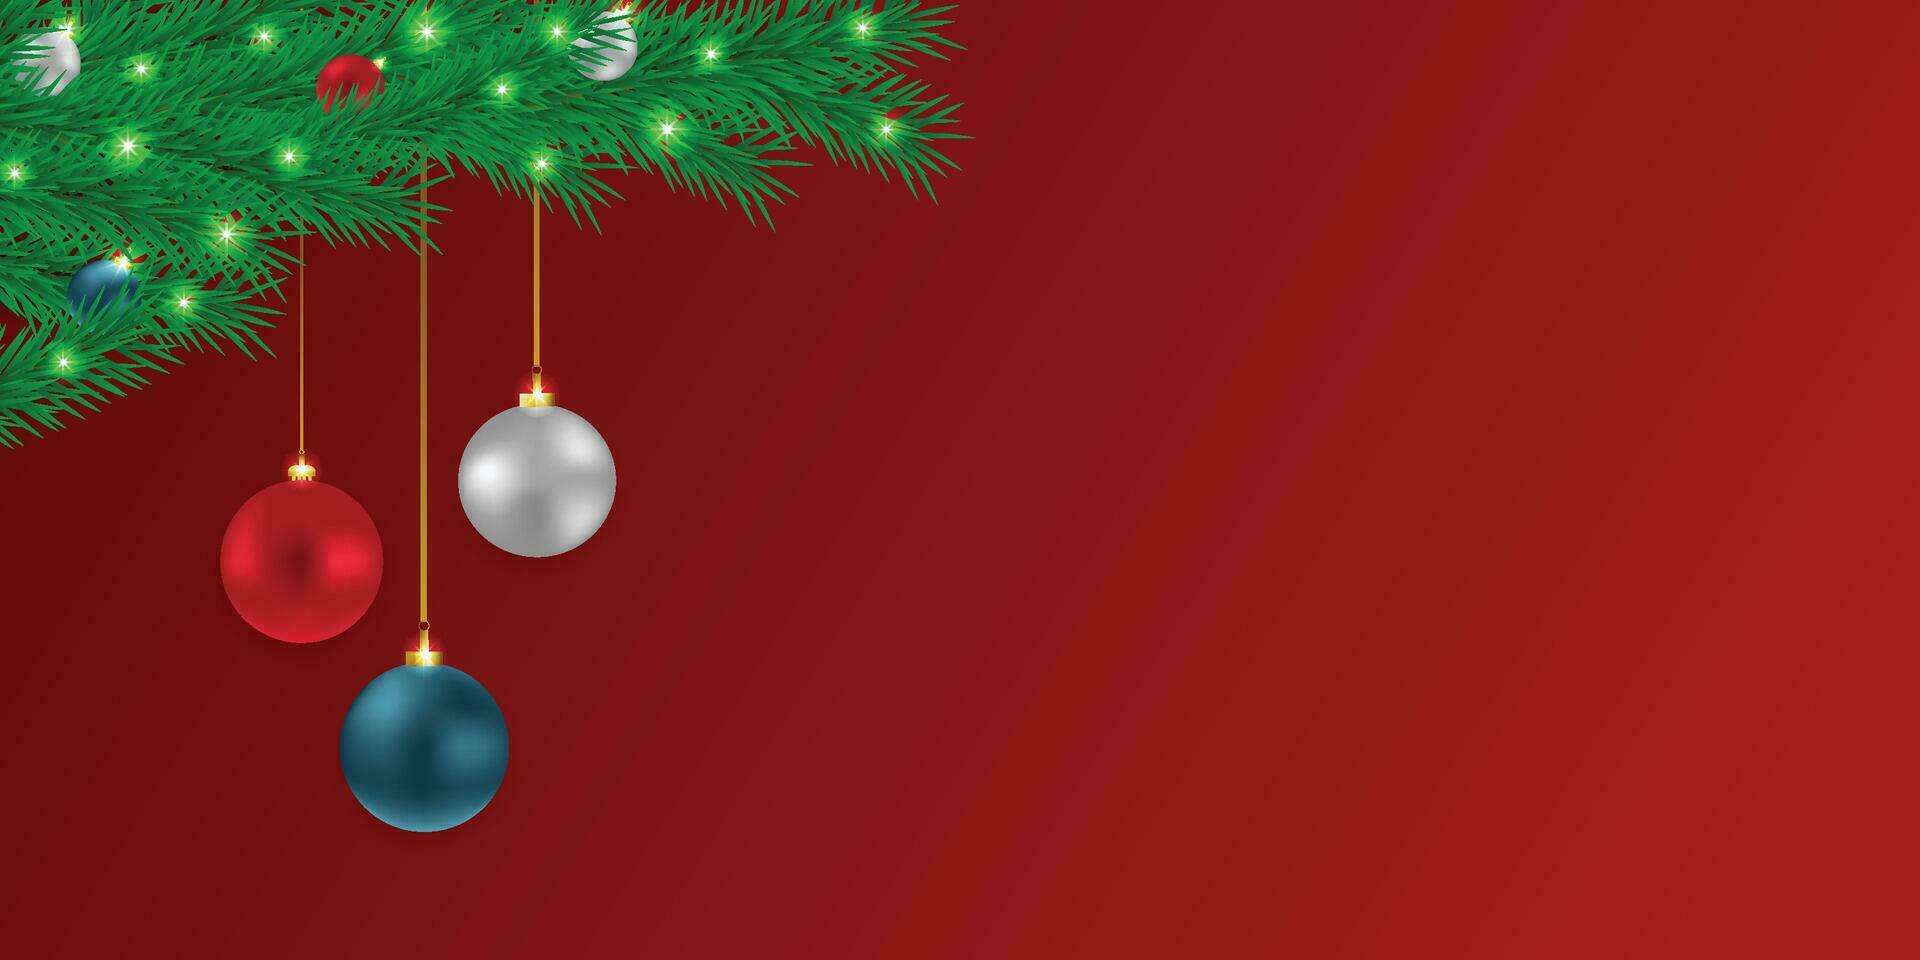 Realistic Christmas green leaf banner with red and white balls with lights. vector